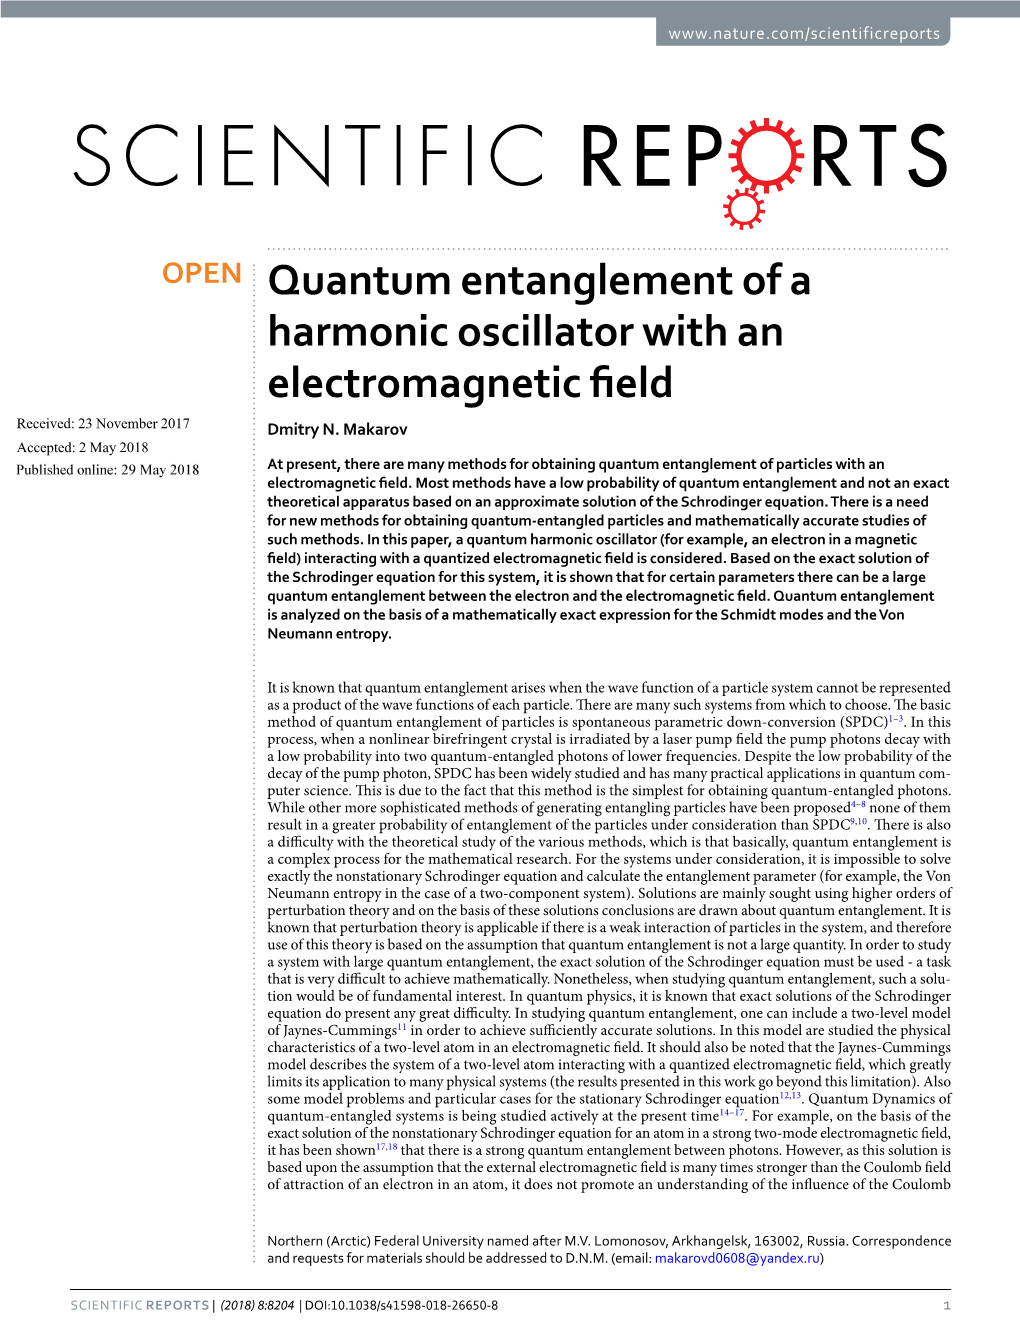 Quantum Entanglement of a Harmonic Oscillator with an Electromagnetic Field